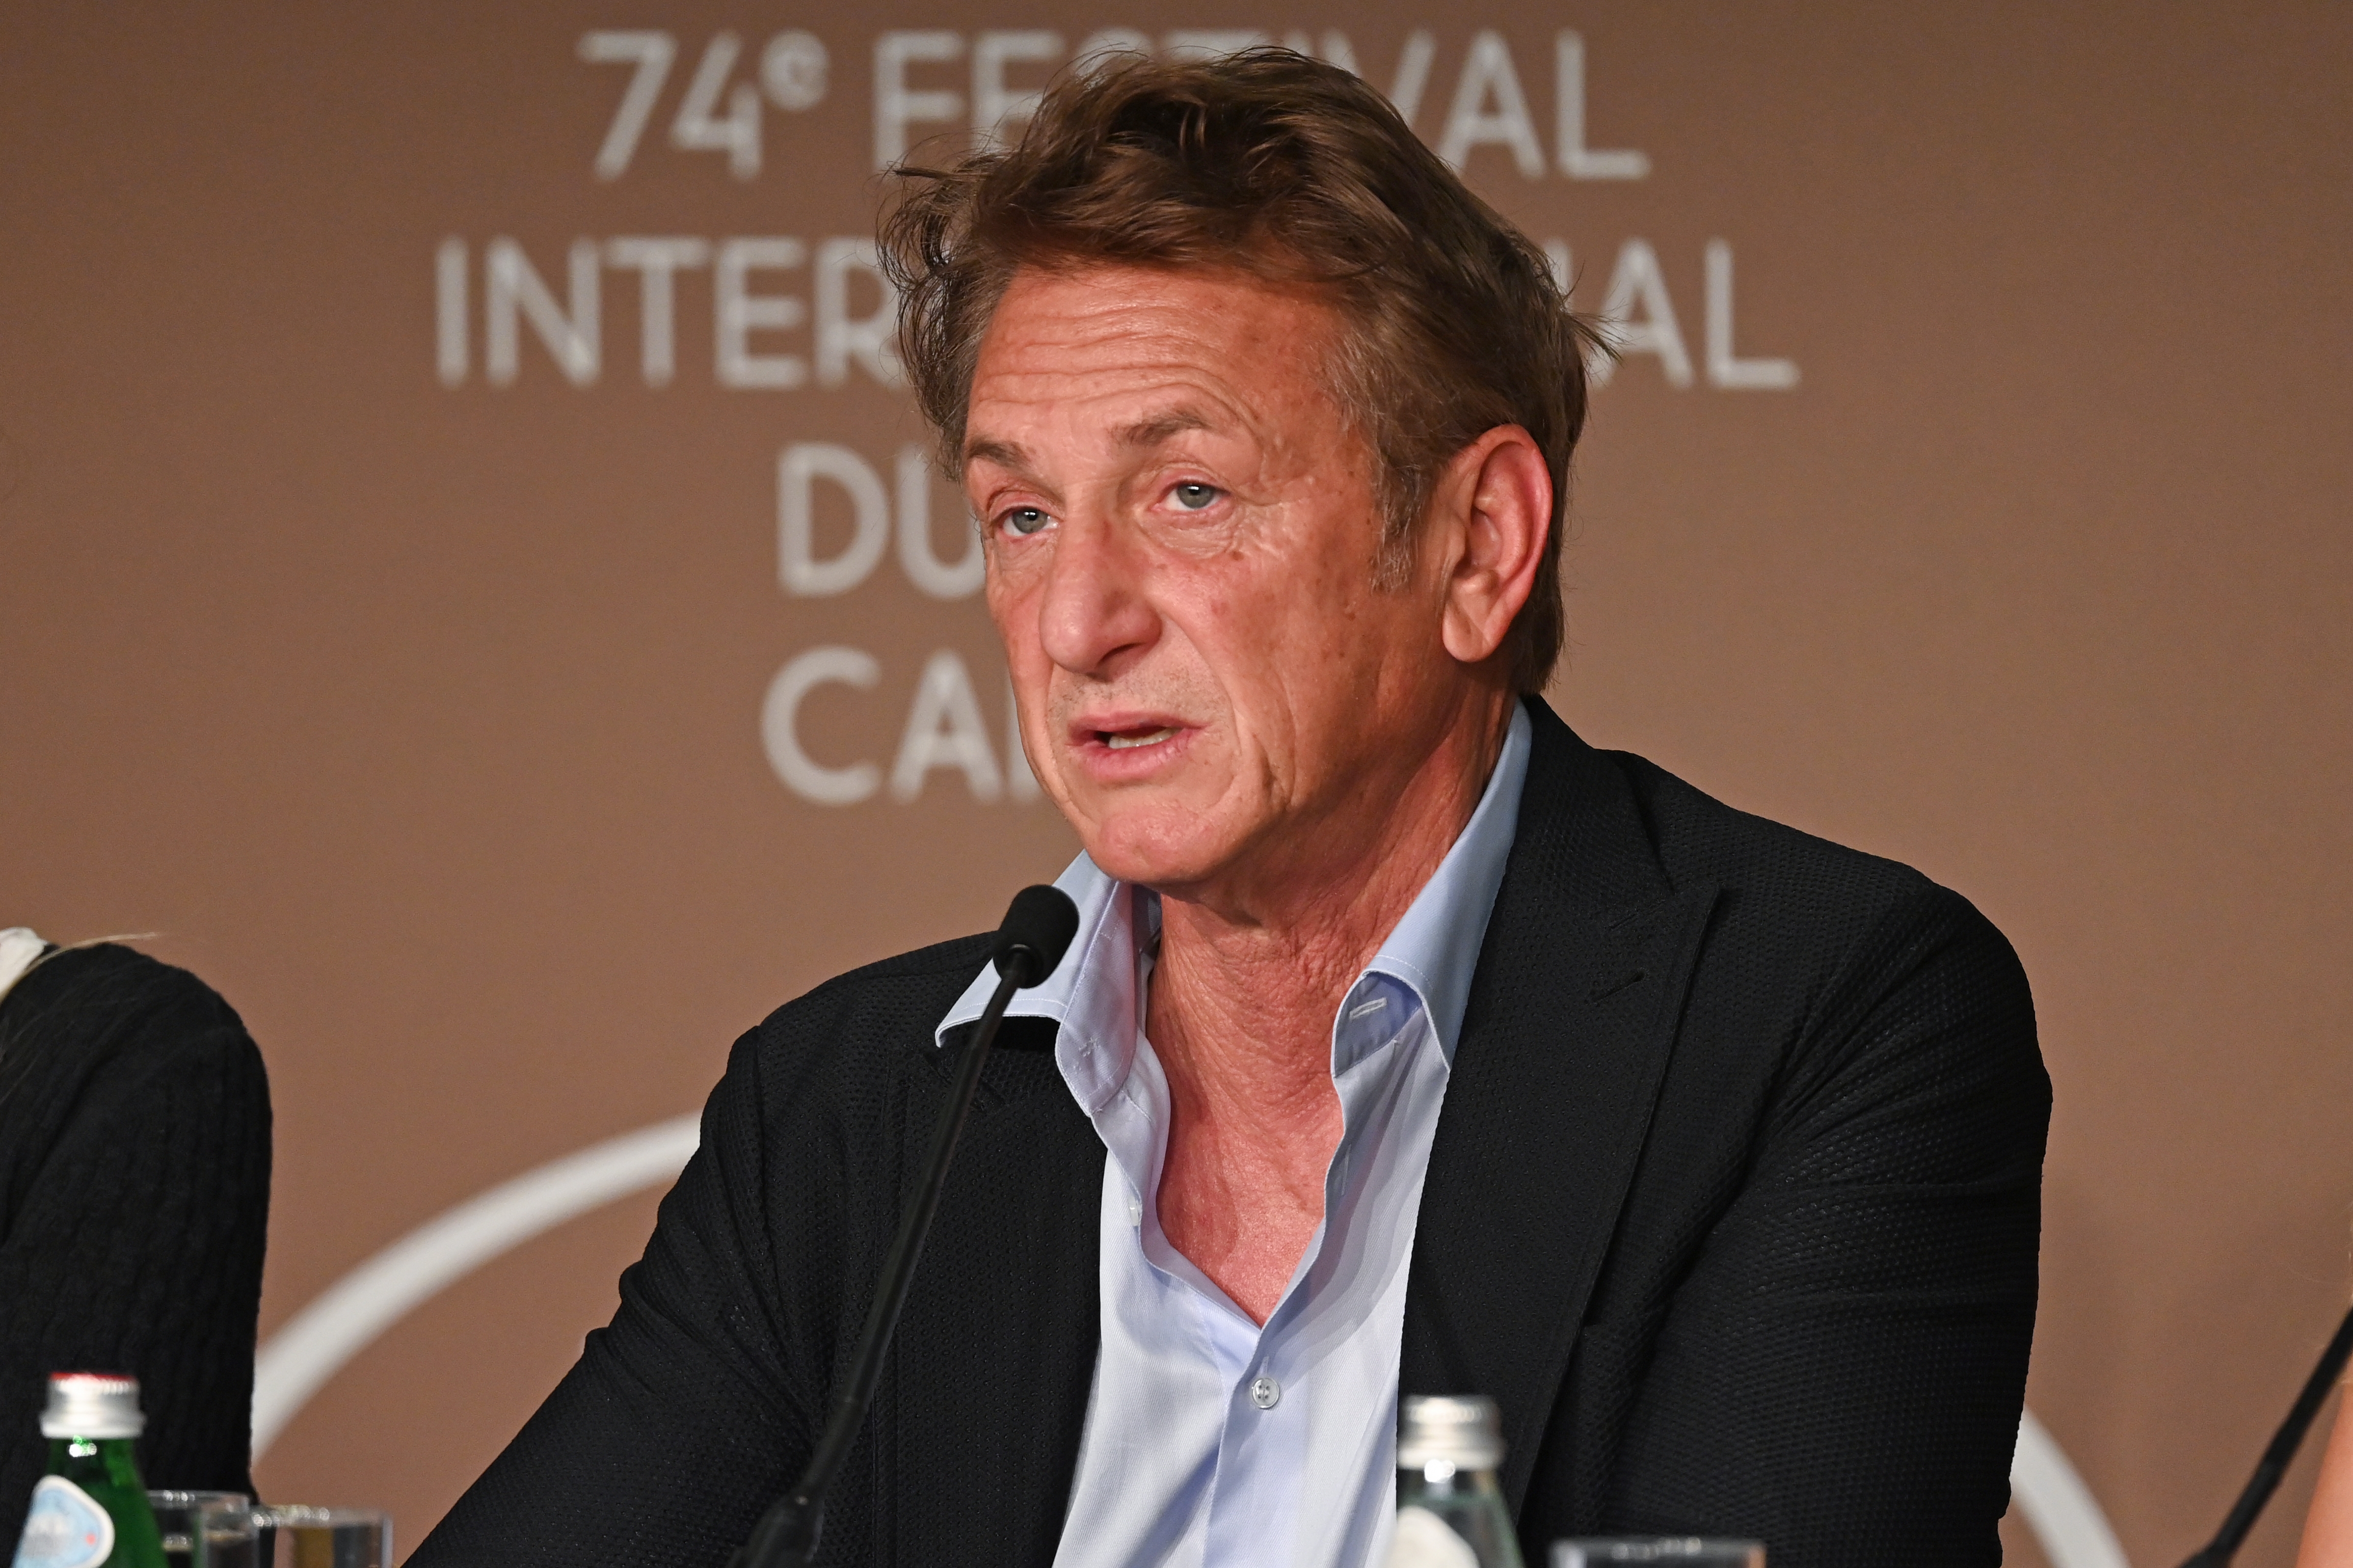 Sean Penn is currently in Ukraine filming a documentary about the invasion